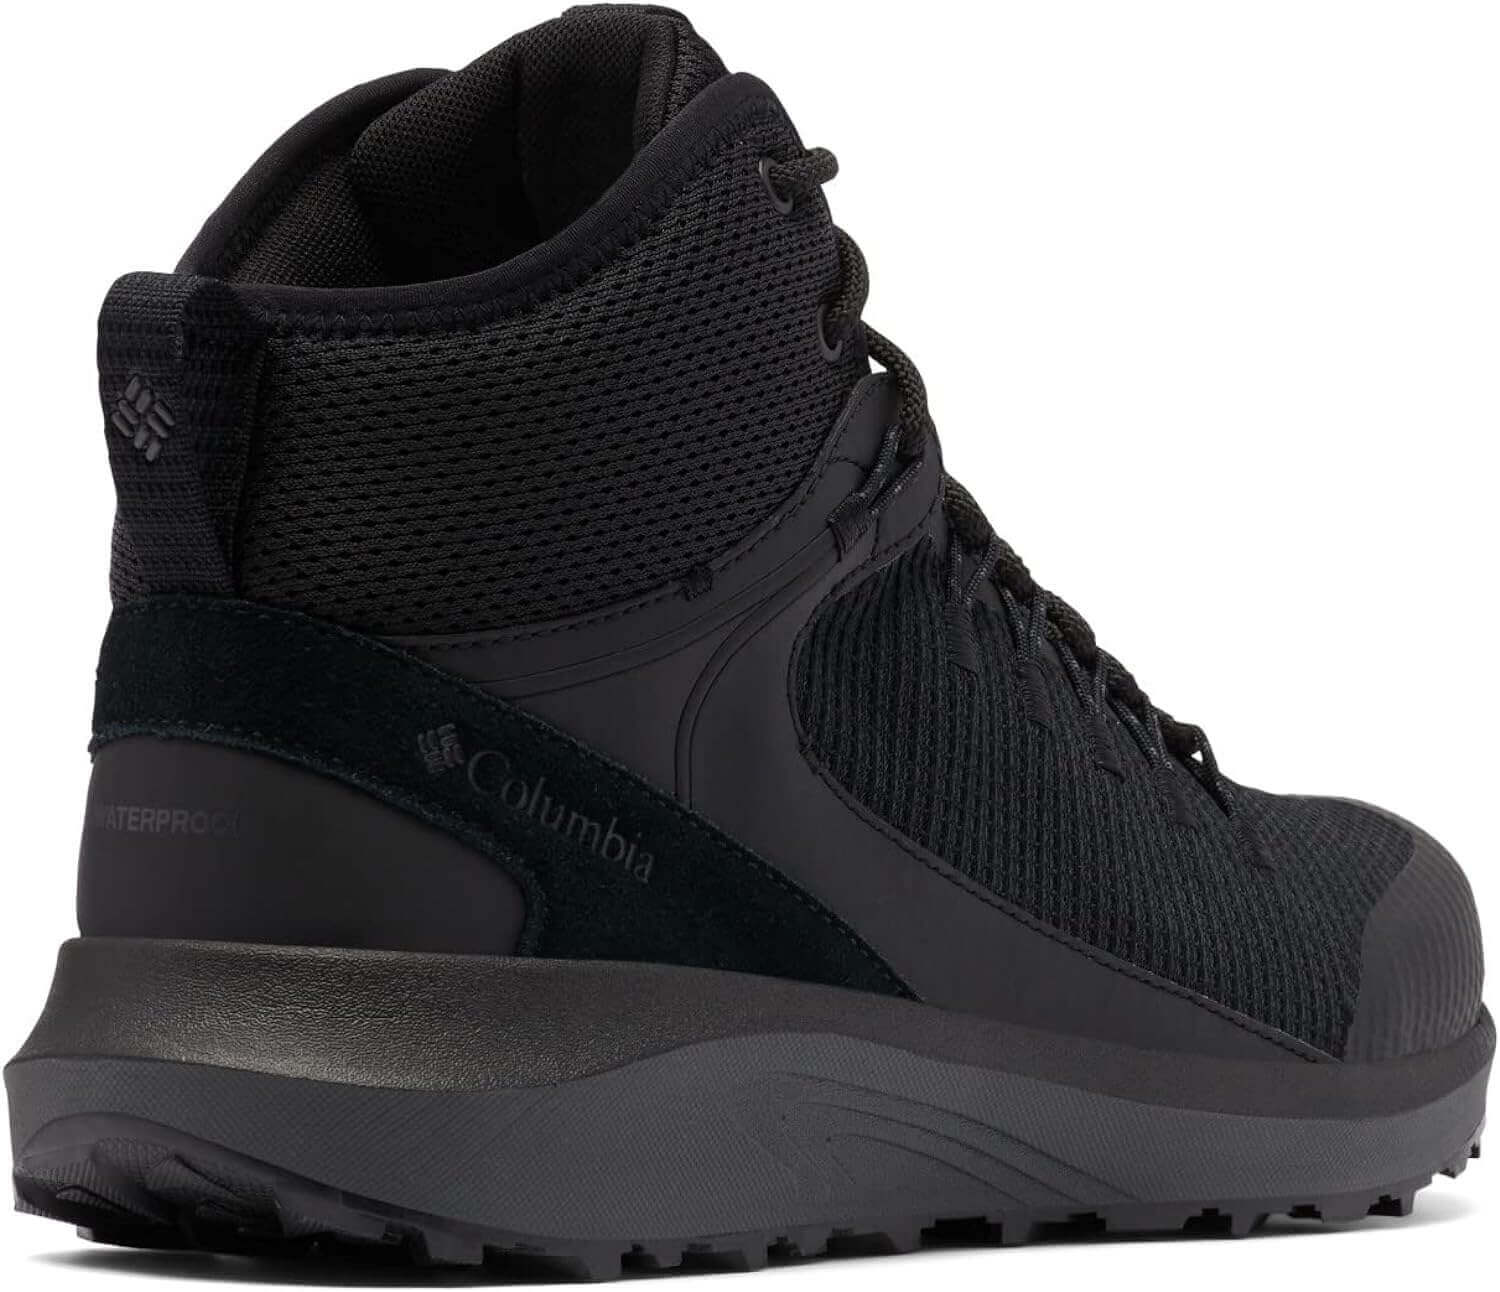 Shop The Latest >Columbia Men's Trailstorm Mid Waterproof Hiking Shoe > *Only $88.55*> From The Top Brand > *Columbial* > Shop Now and Get Free Shipping On Orders Over $45.00 >*Shop Earth Foot*